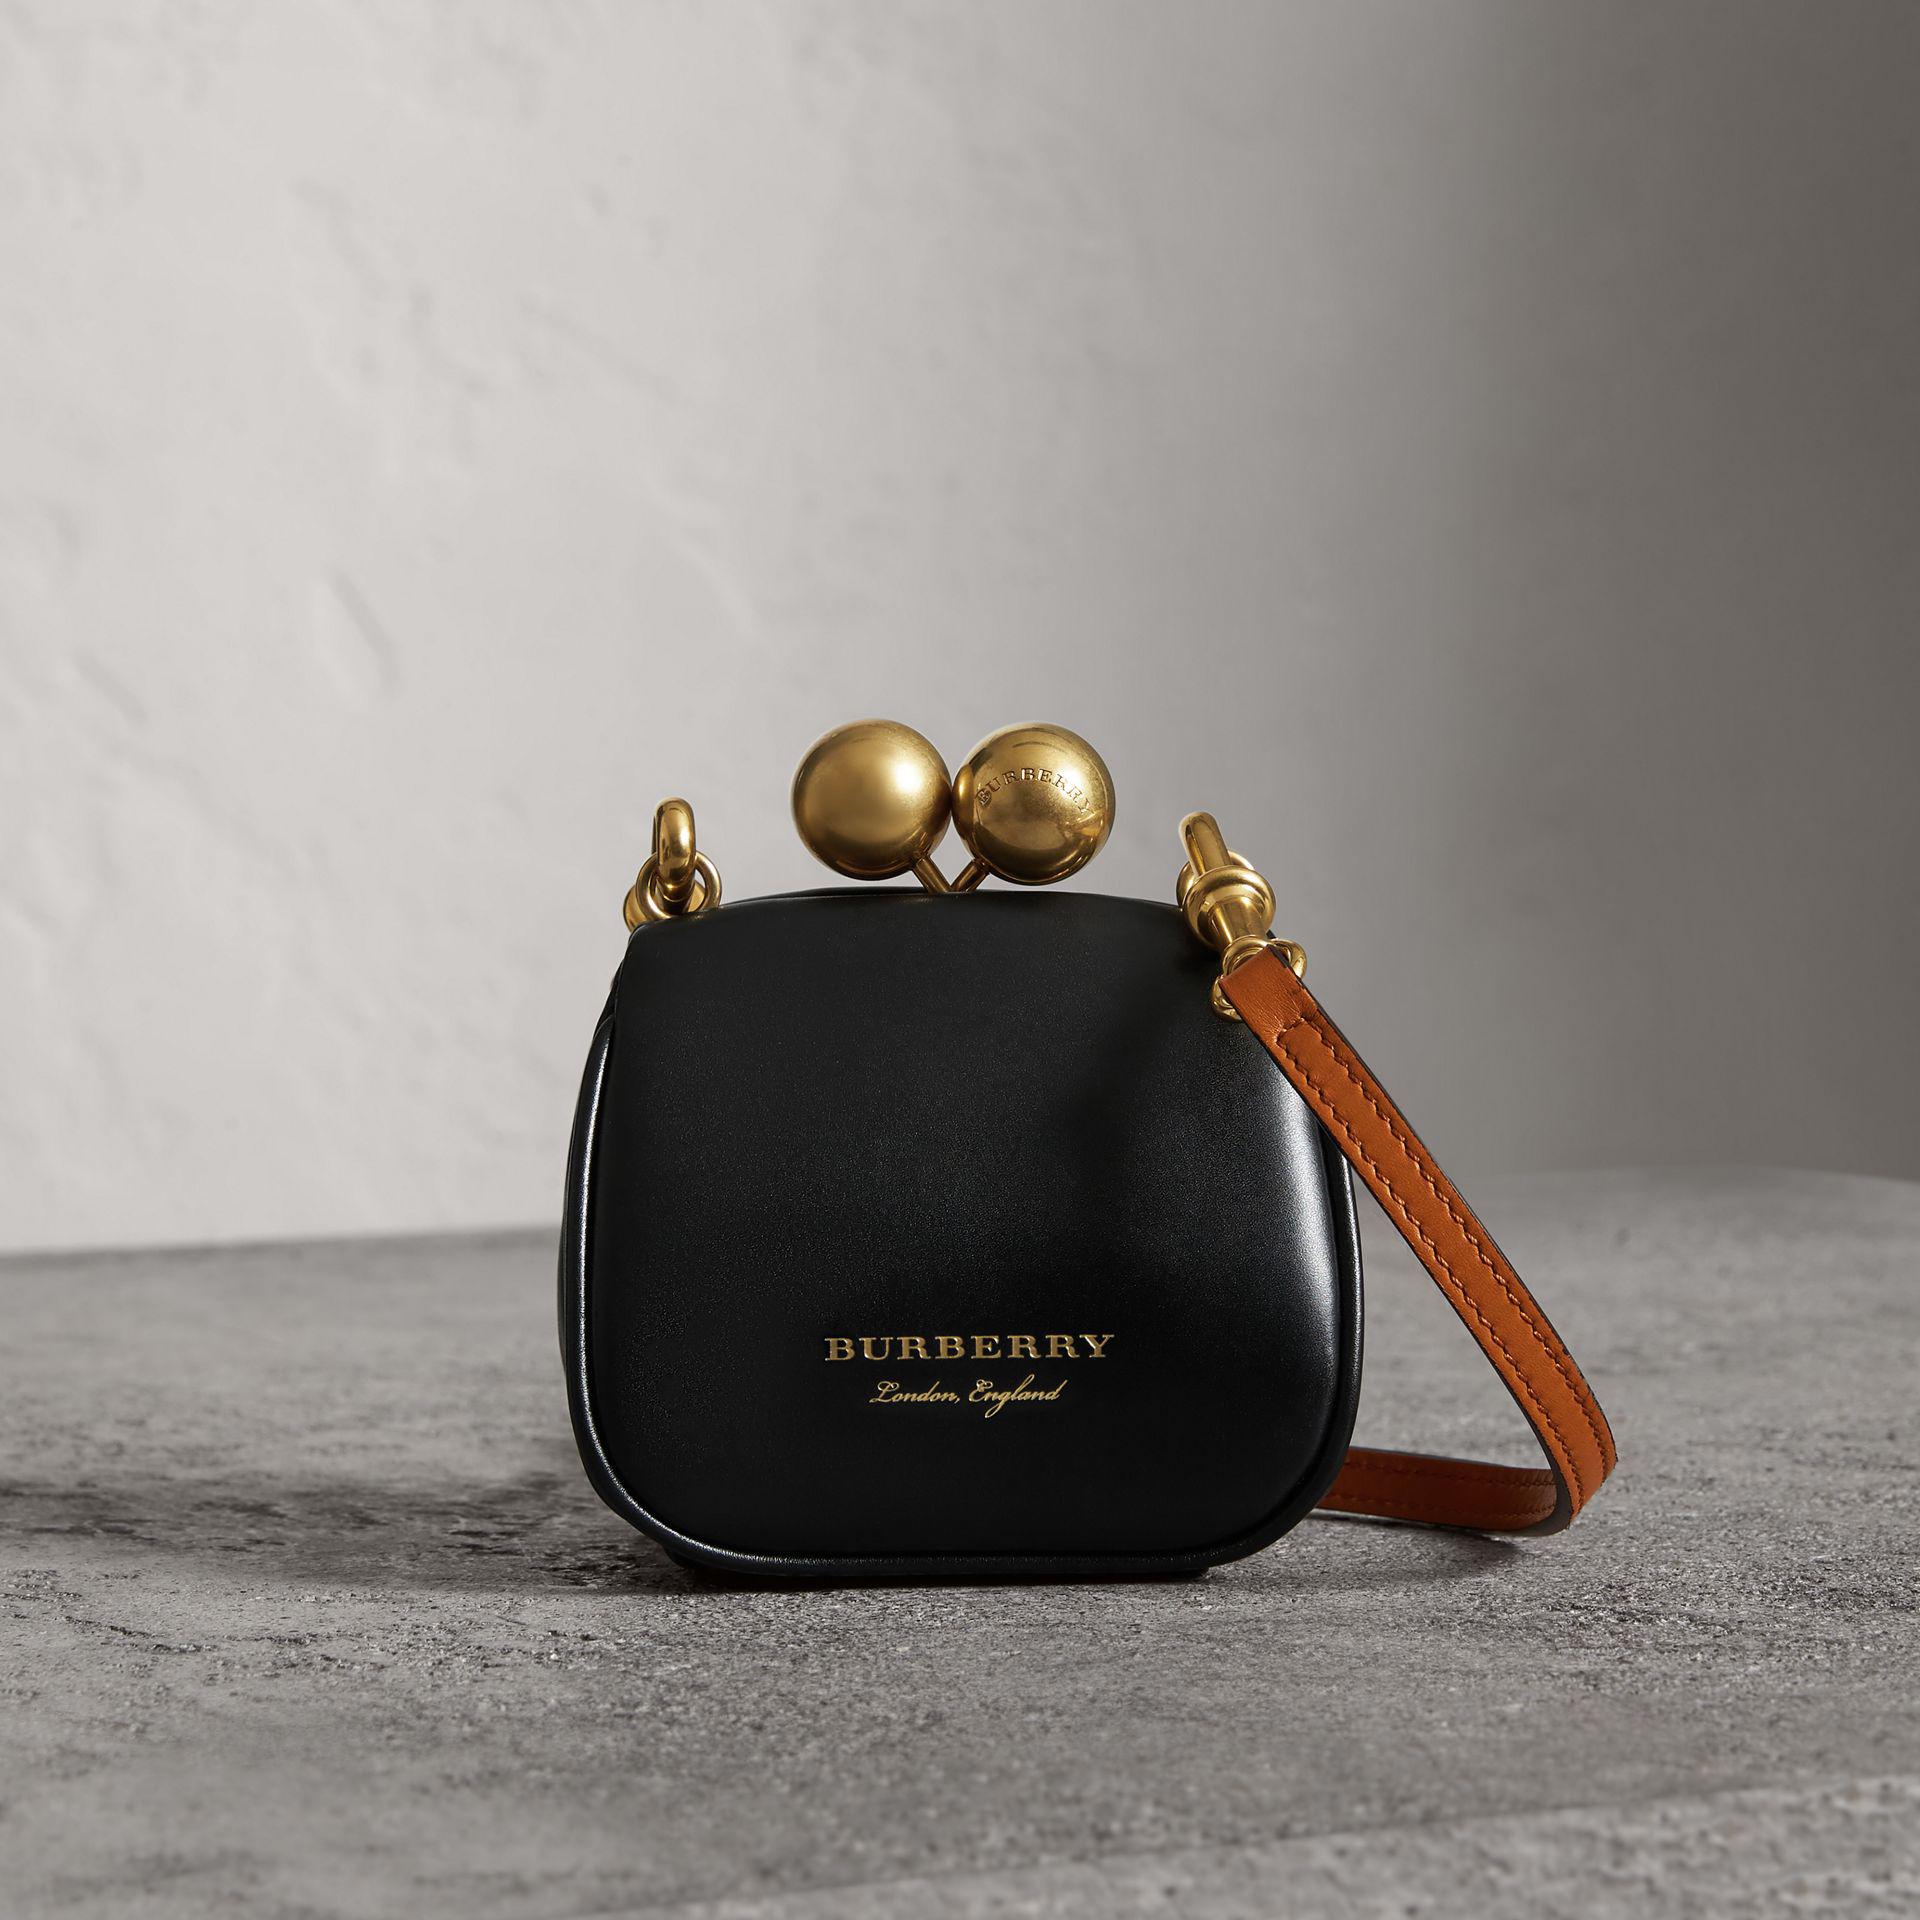 Burberry Mini Two-tone Leather Frame Bag in Black | Lyst